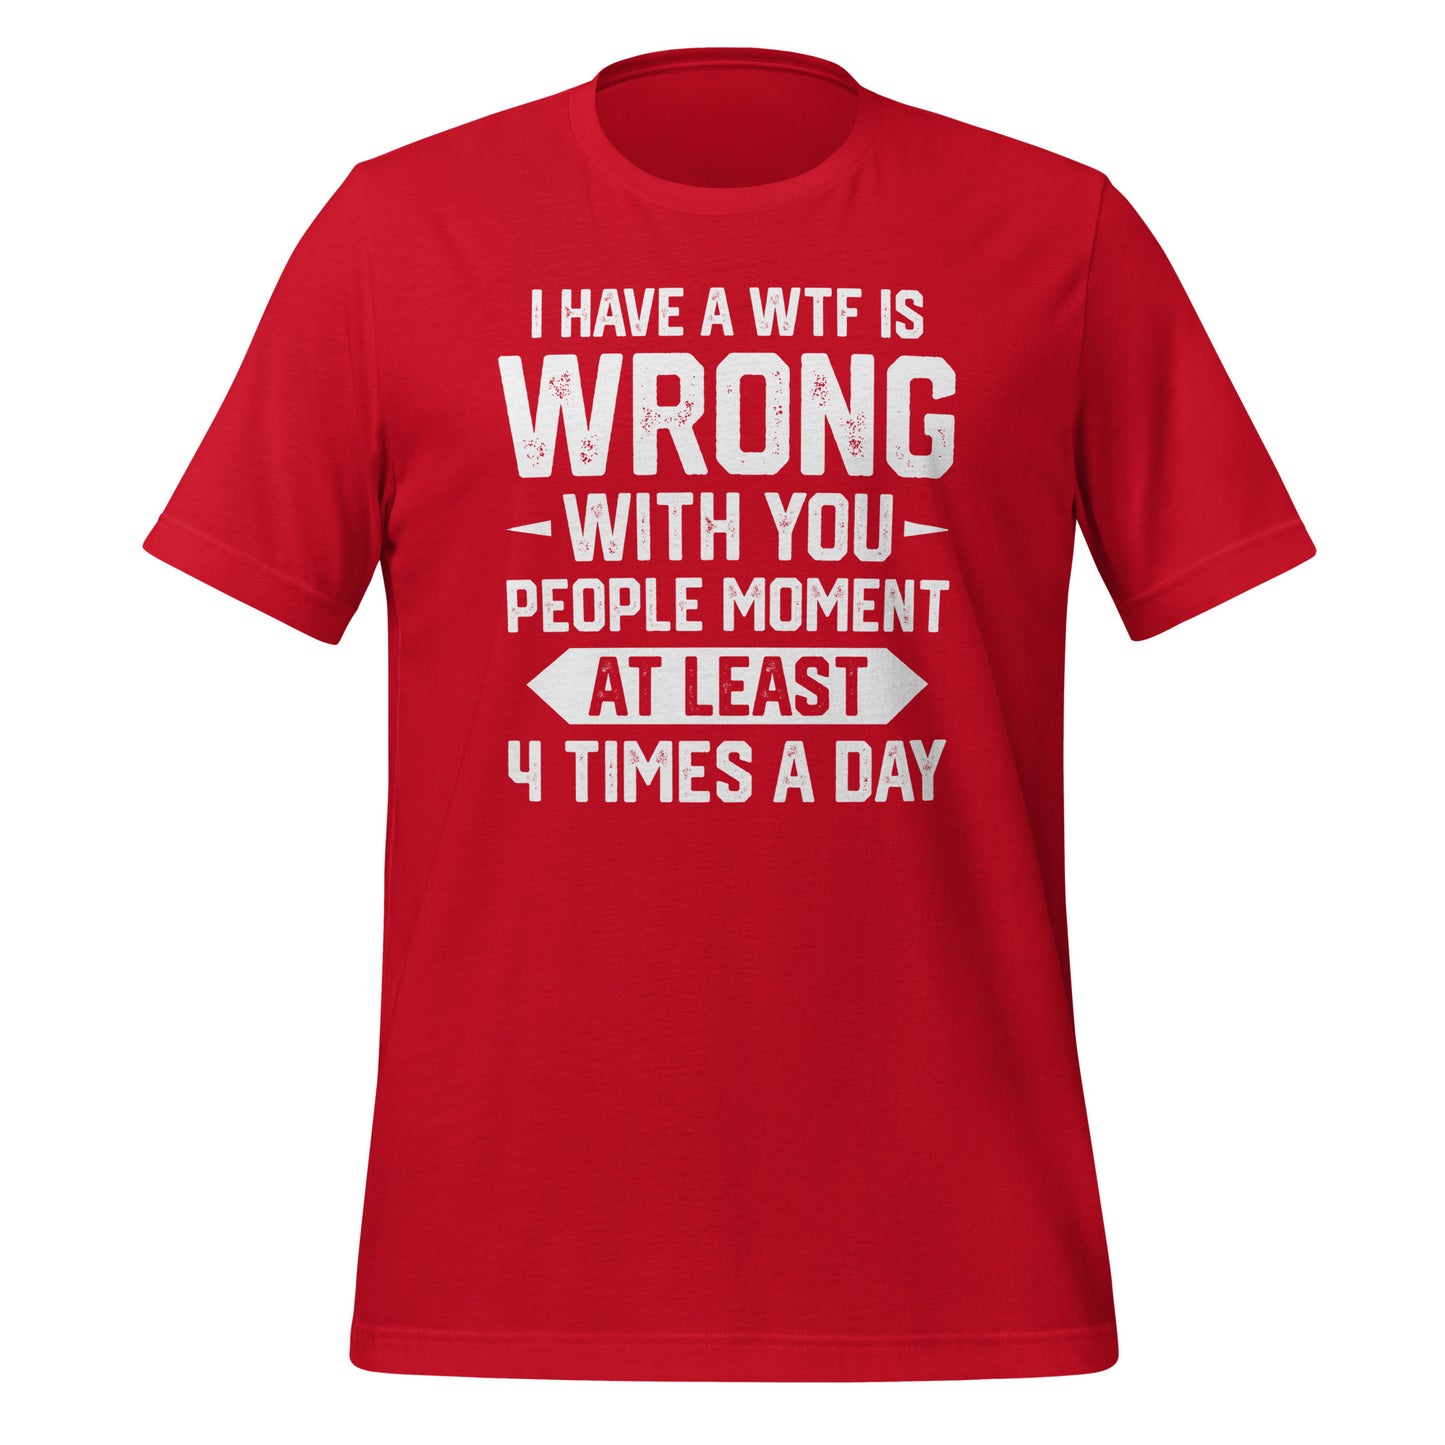 WTF is Wrong with You People Quality Cotton Bella Canvas Adult T-Shirt